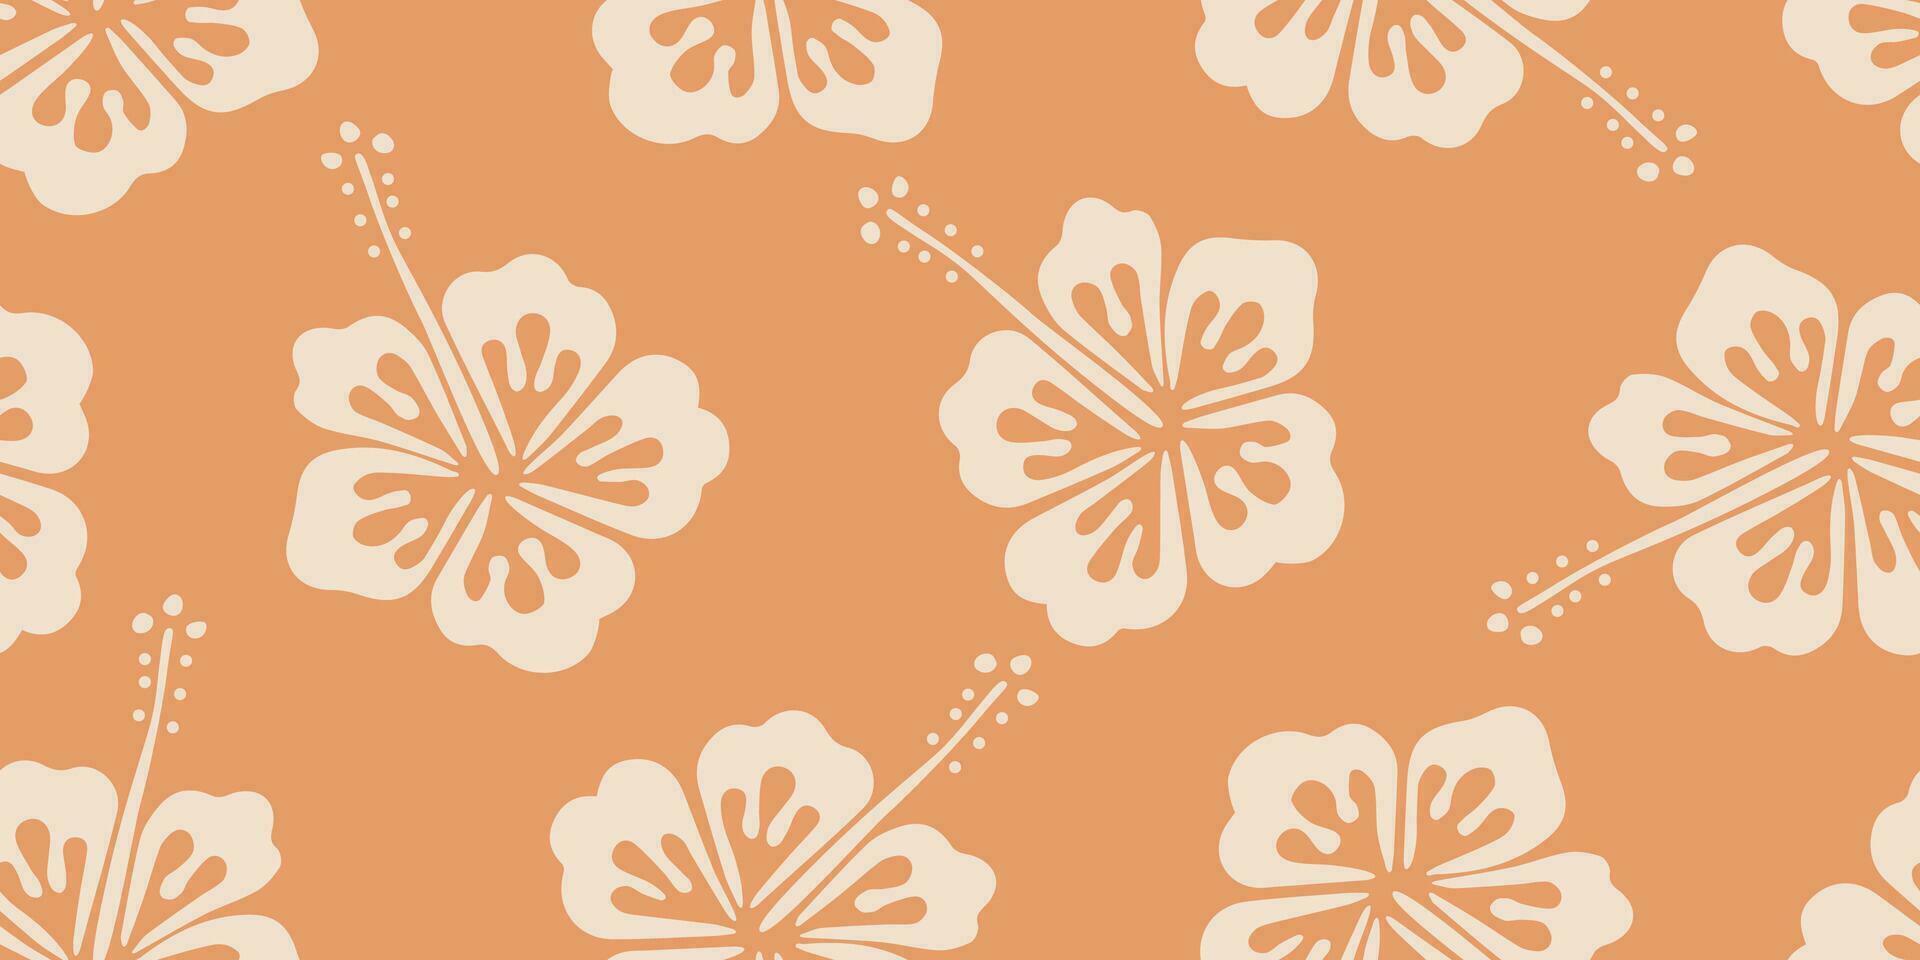 Tropical flower pattern seamless, silhouette of hibiscus flowers, hand drawn botanical, Floral leaf for spring and Summer time, natural ornaments for textile, fabric, wallpaper, background design. vector